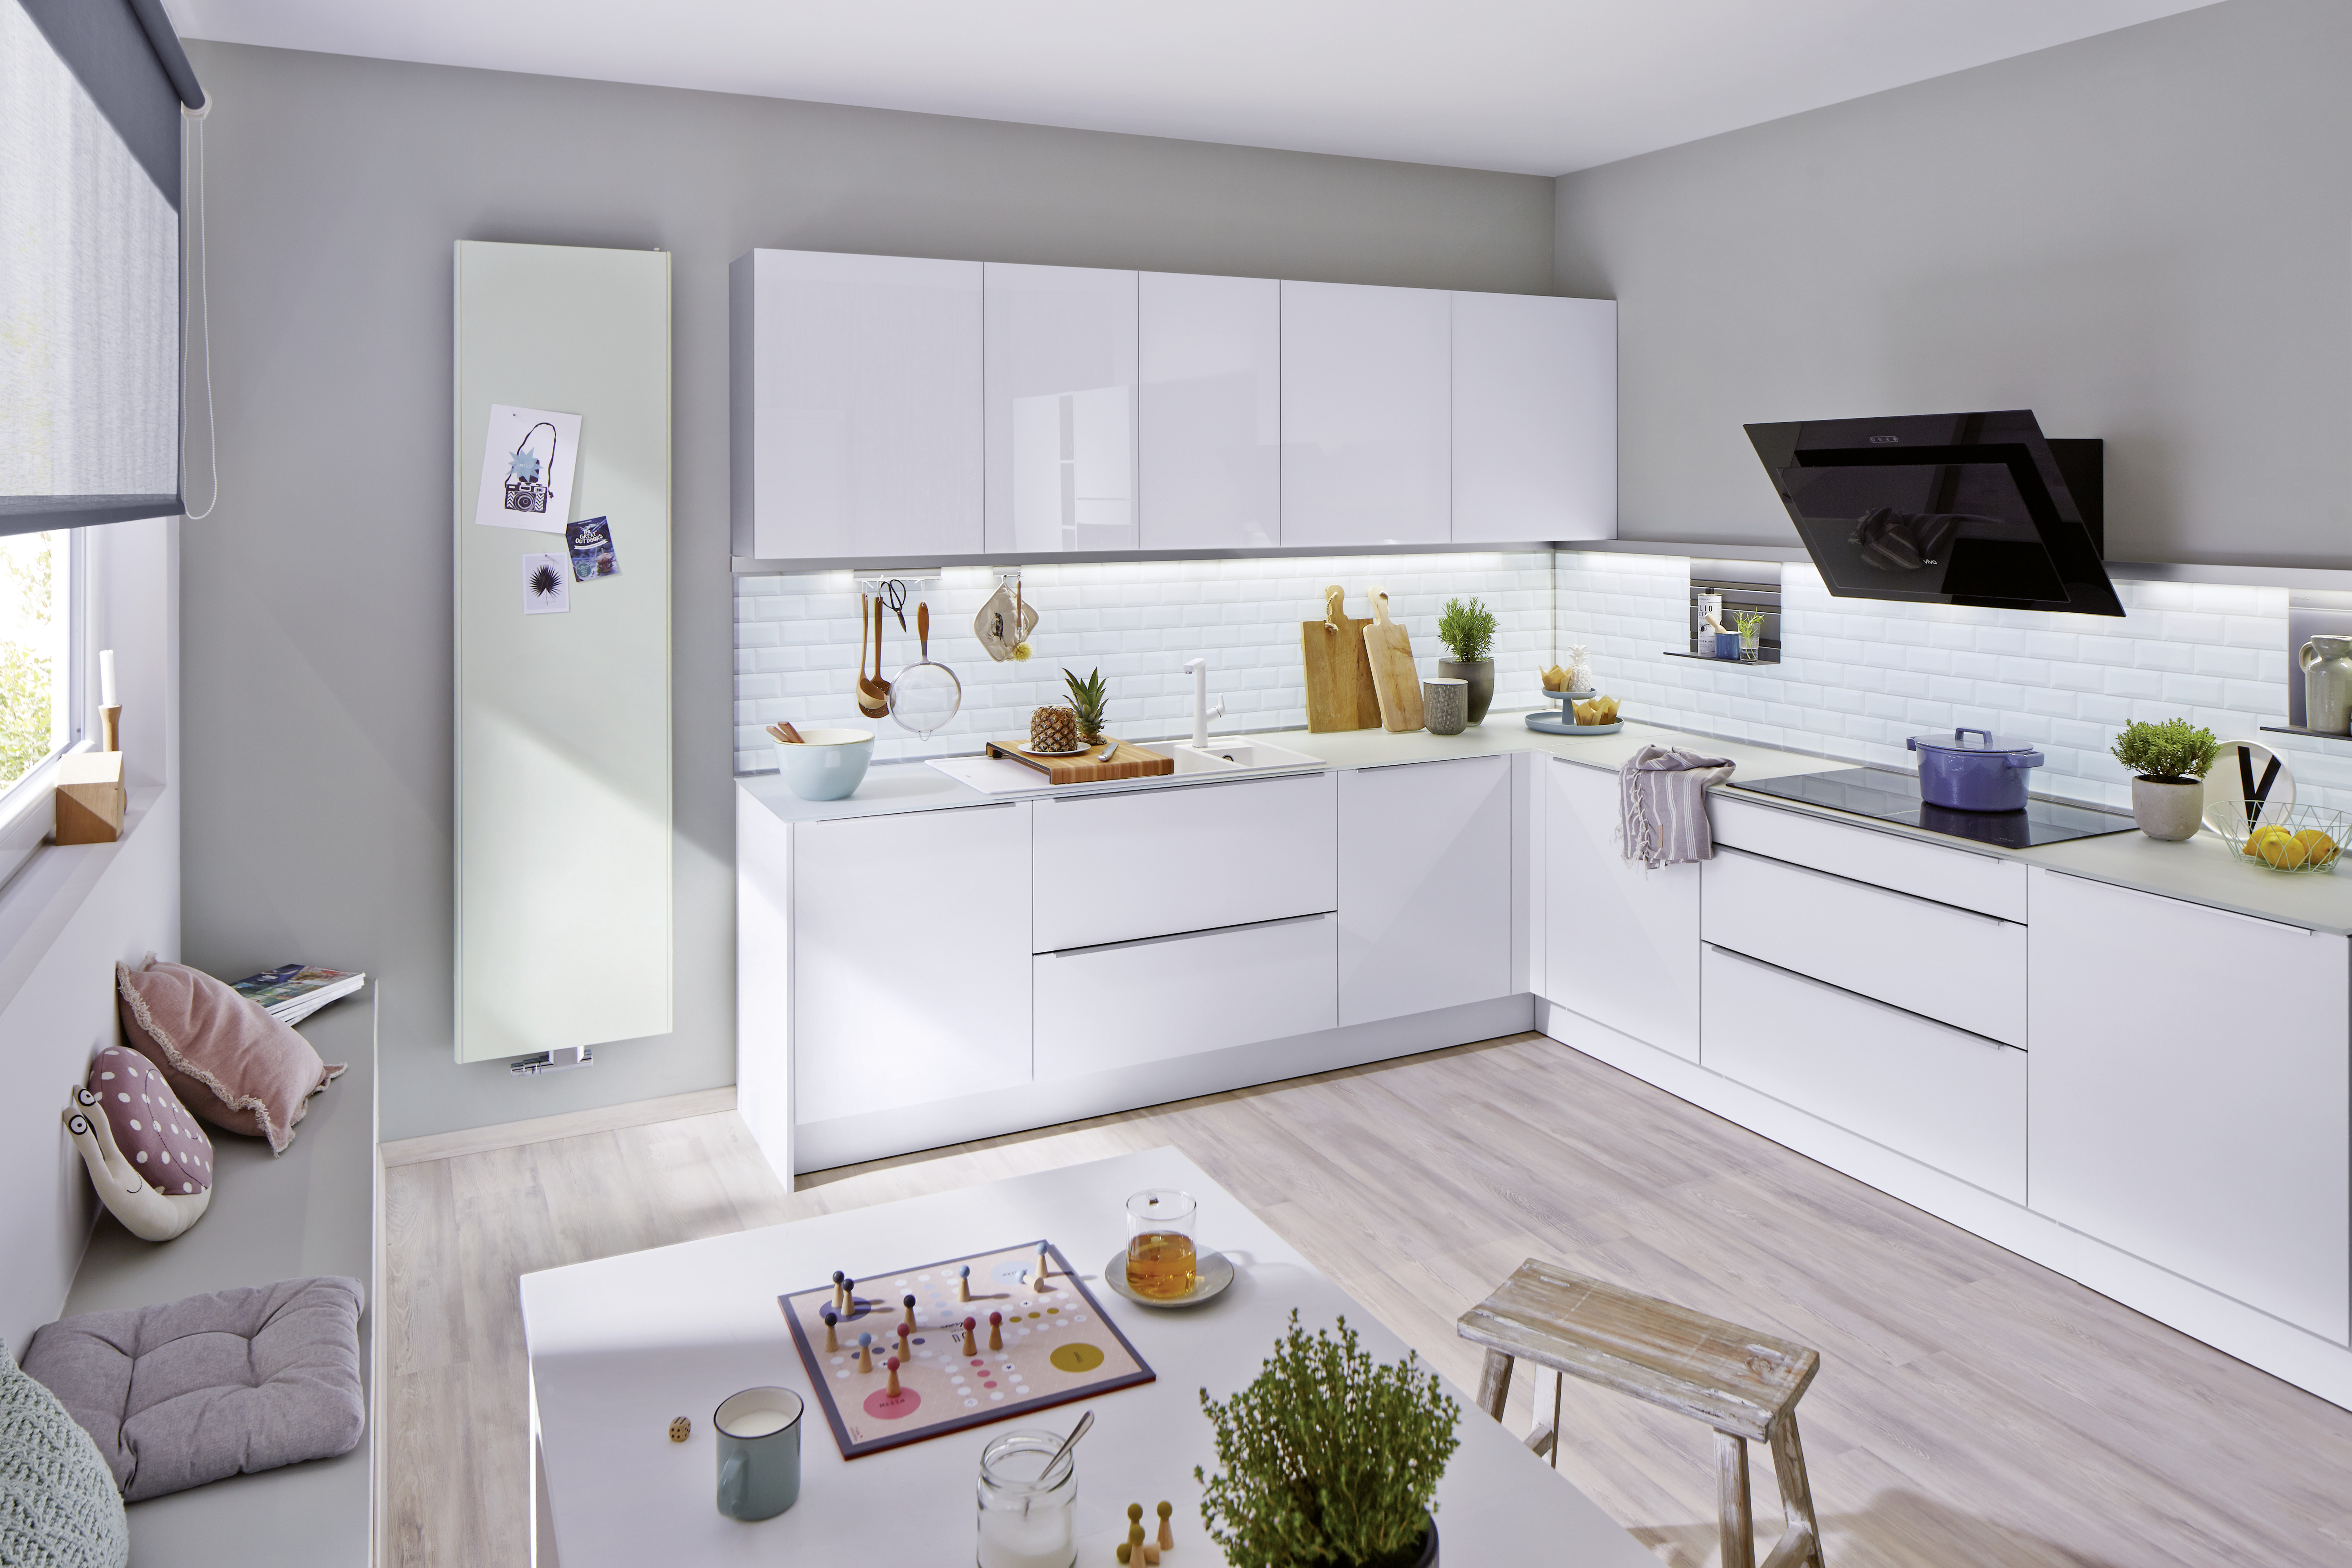 A modern kitchen in white, in the practical L shape